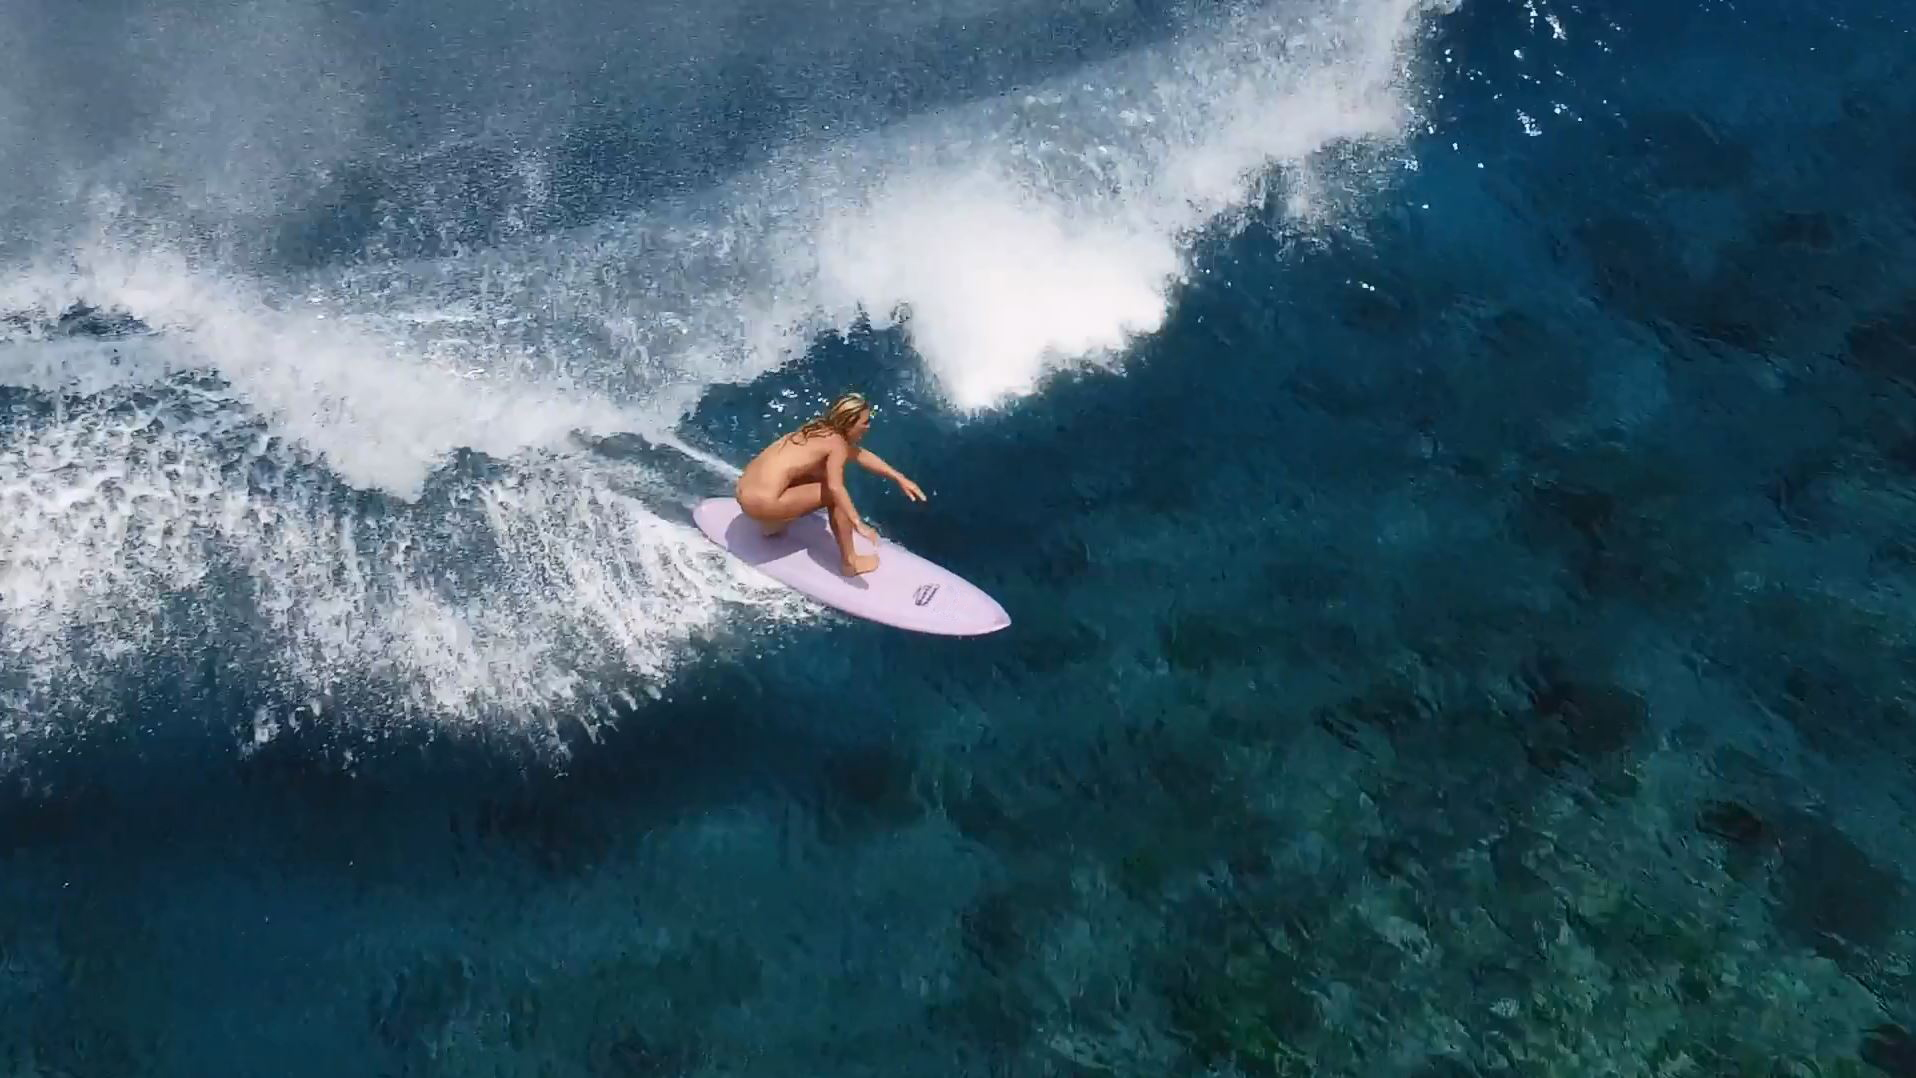 Felicity Palmateer Discusses Her Controversial Nude Surfing Film Skin Deep The Inertia